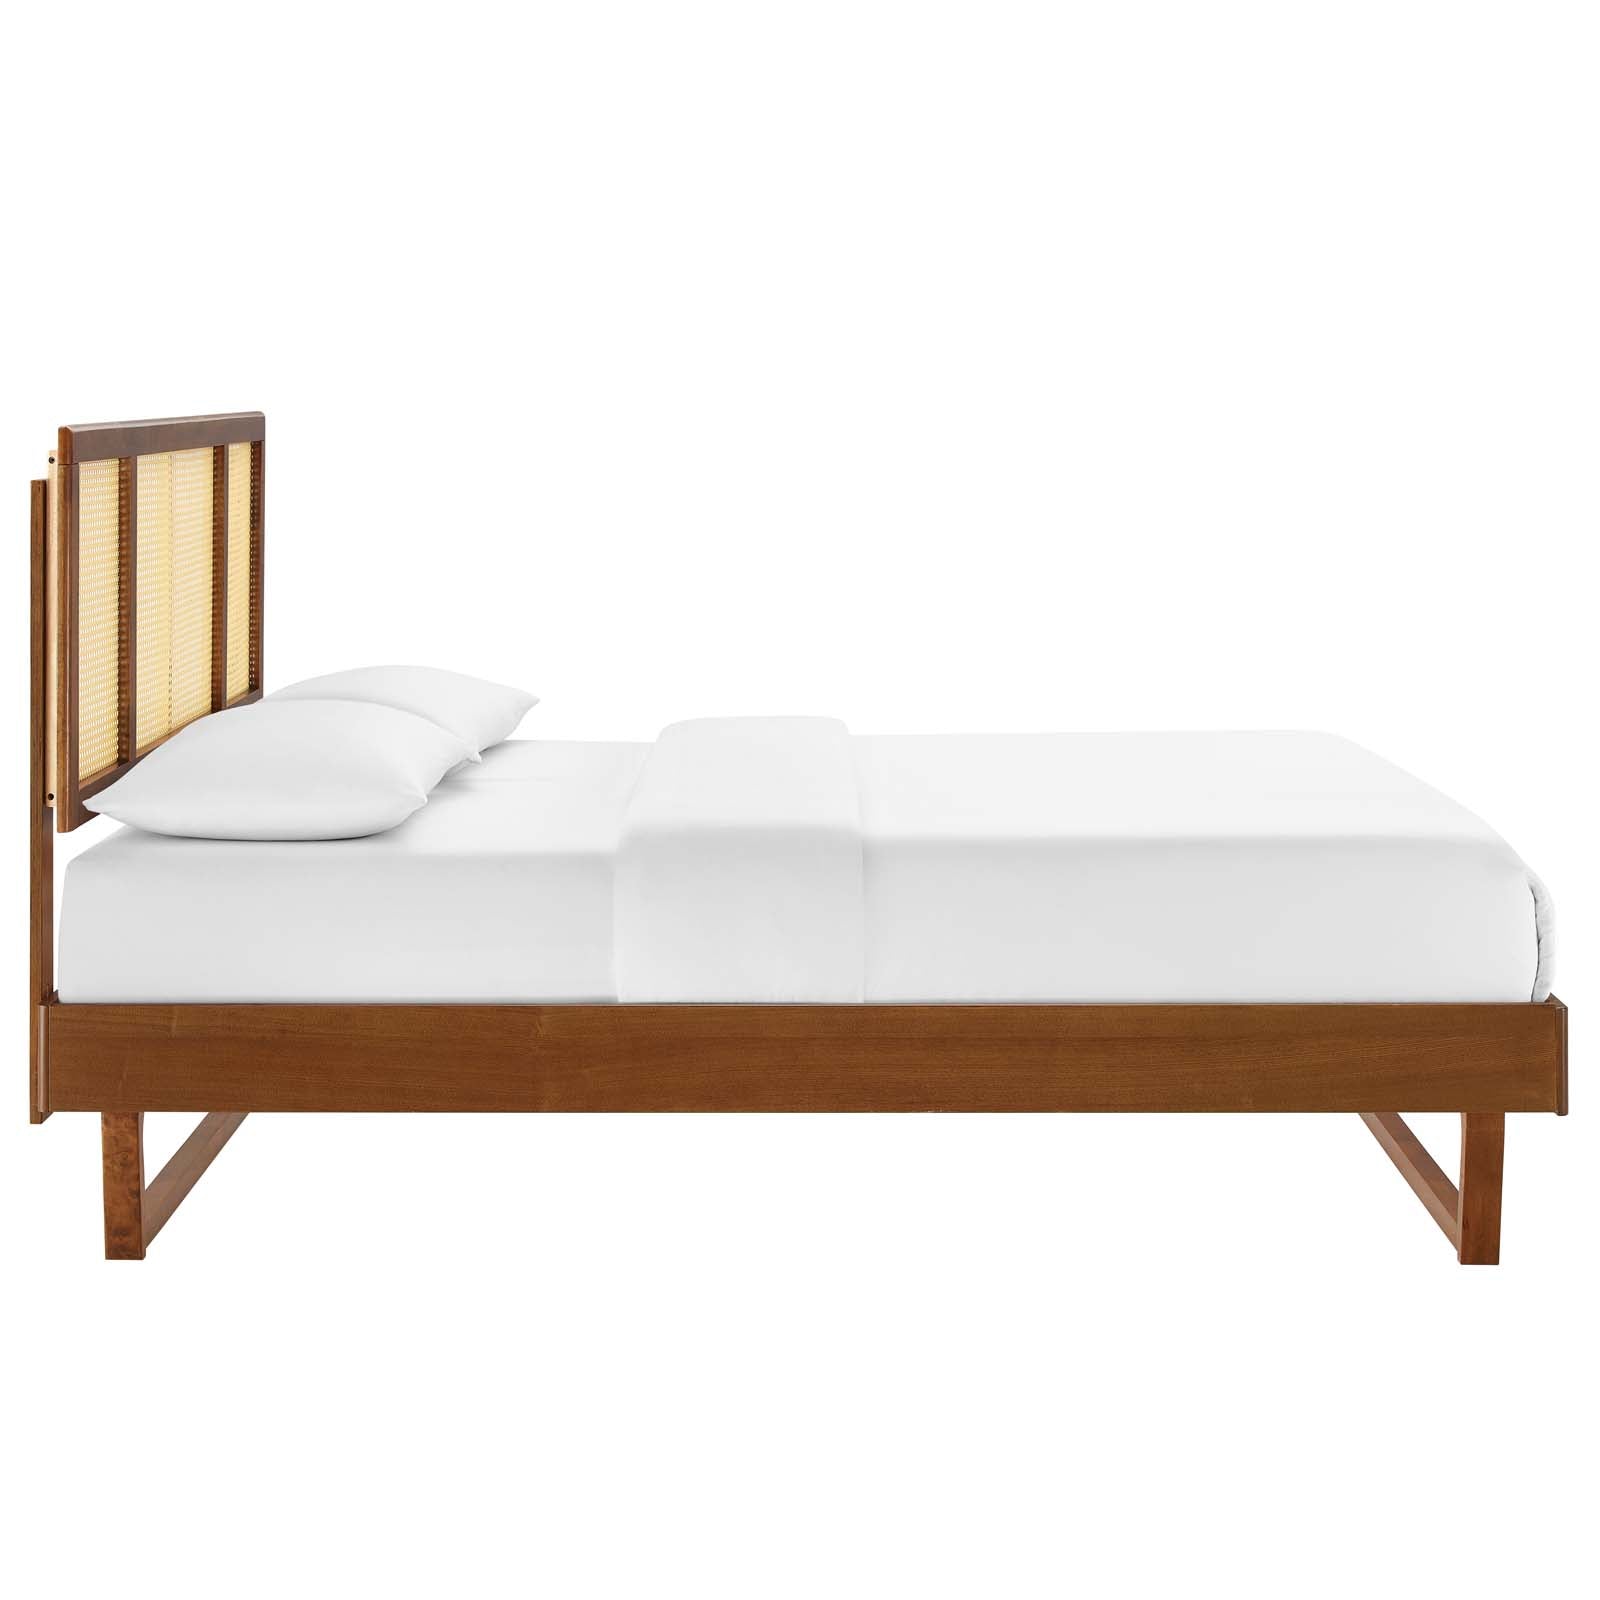 Kelsea Cane and Wood Platform Bed With Angular Legs - East Shore Modern Home Furnishings